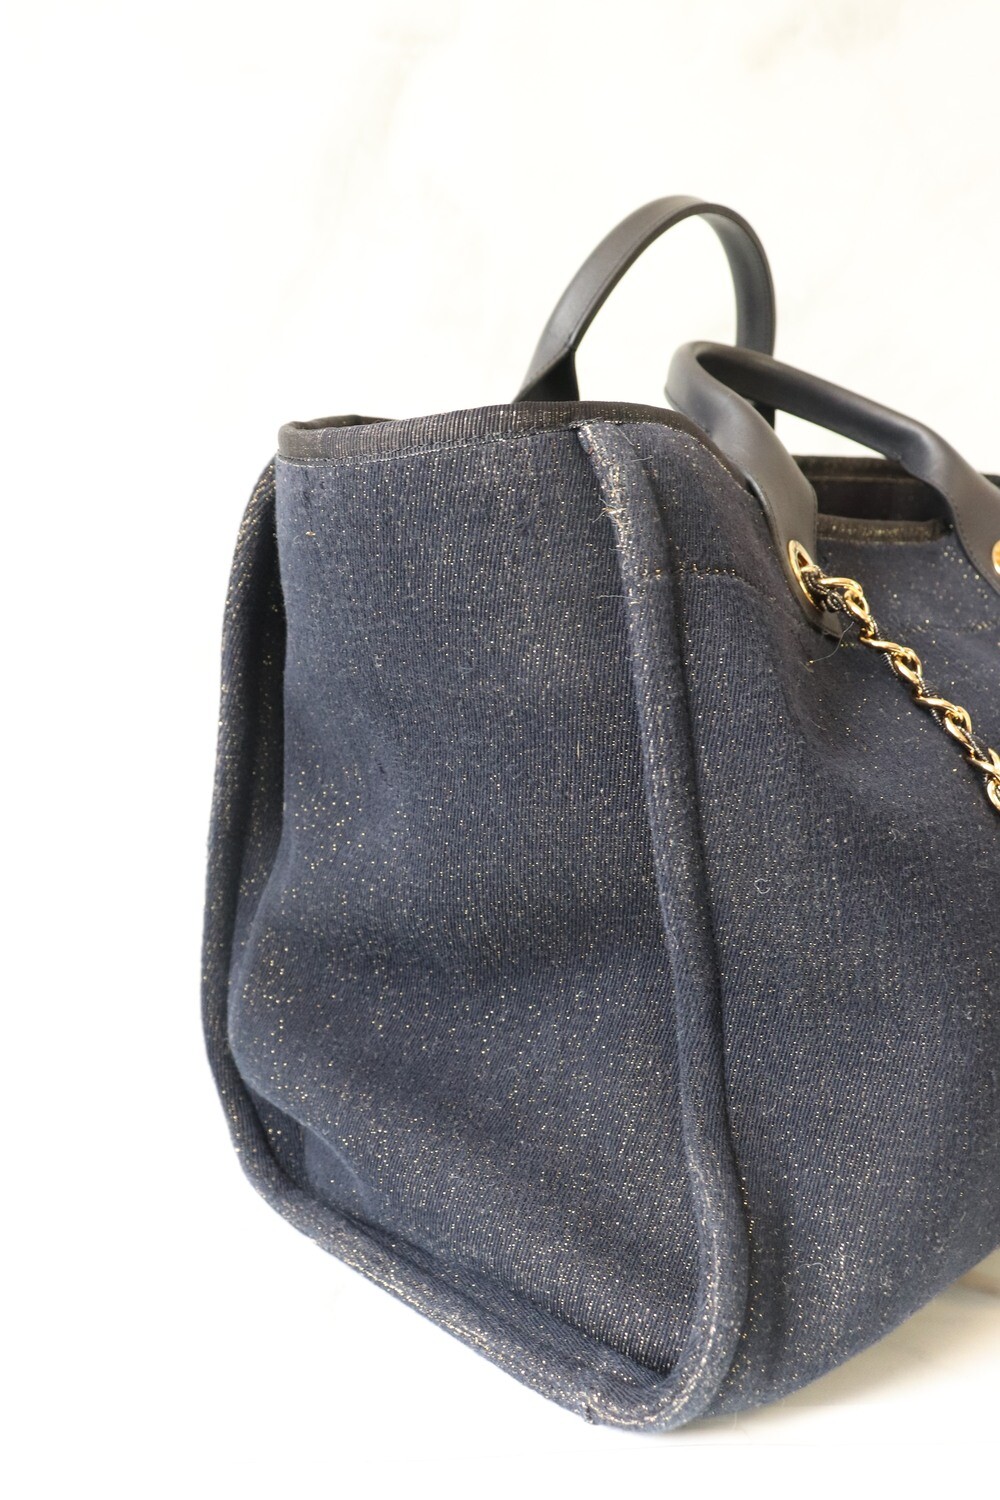 Chanel Deauville Small with Handles and Pouch, Dark Blue Denim with Gold  Hardware, New in Dustbag GA006